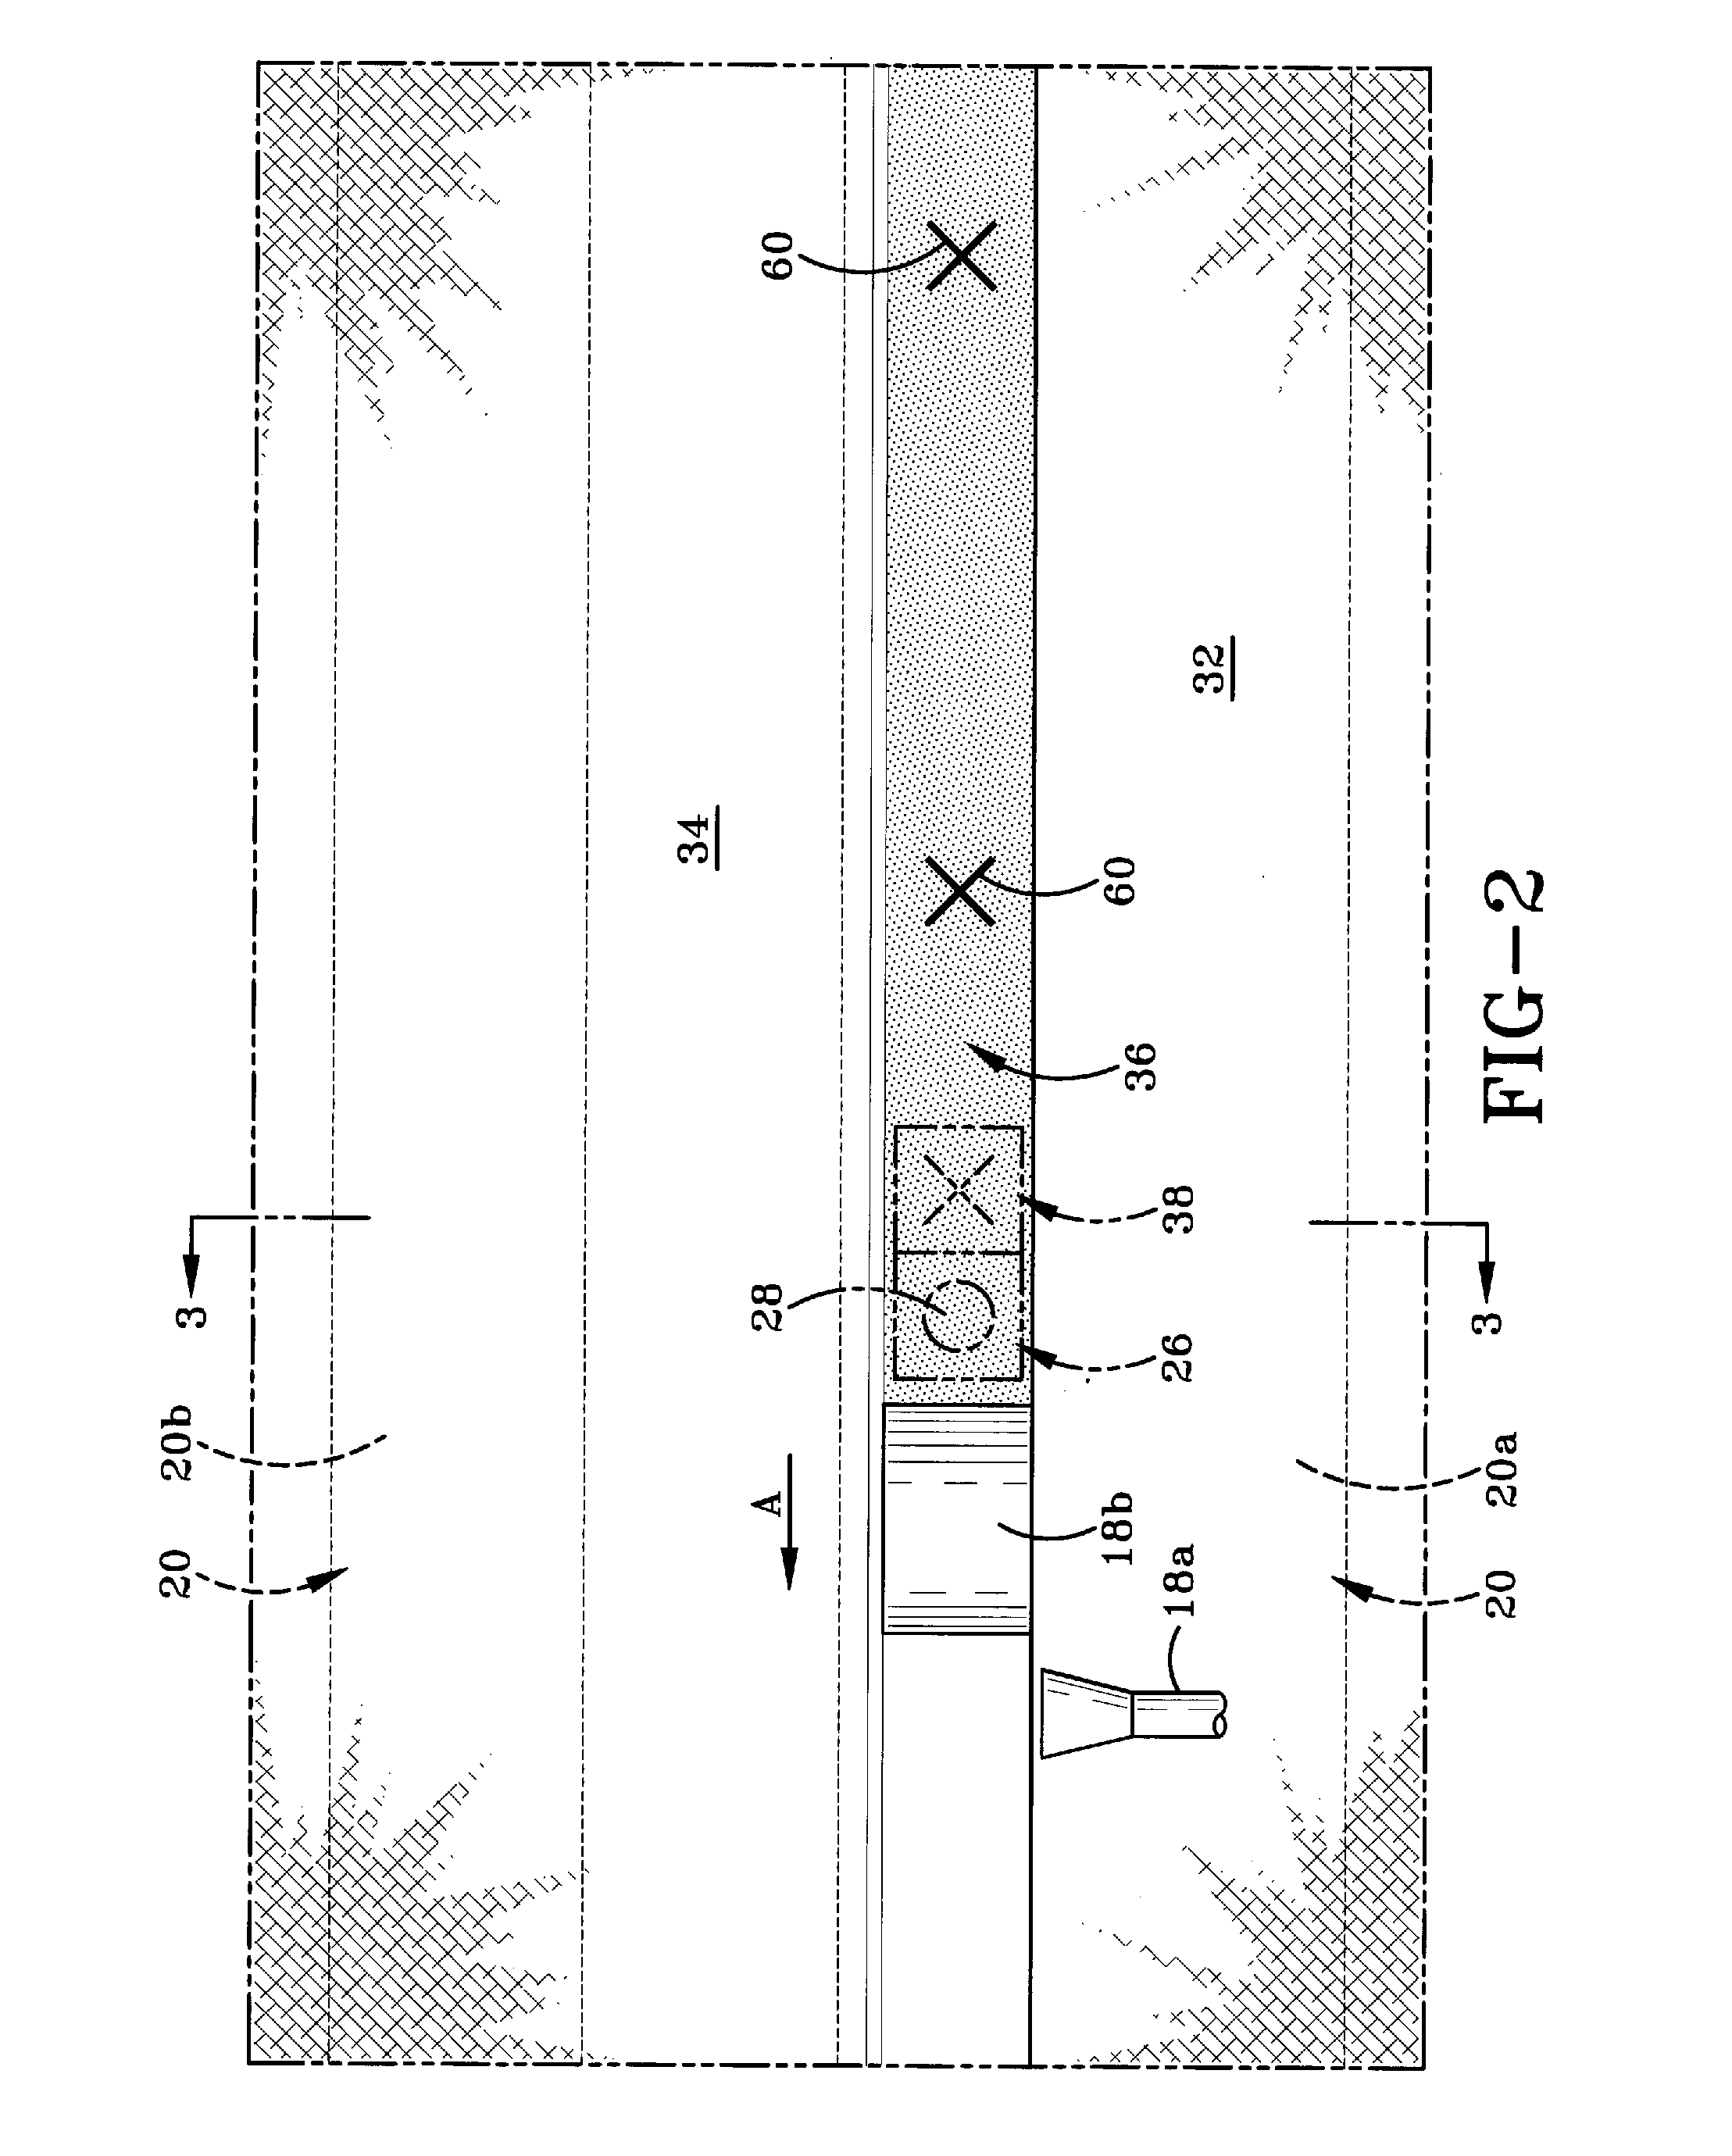 Method and apparatus for controlling welding of flexible fabrics